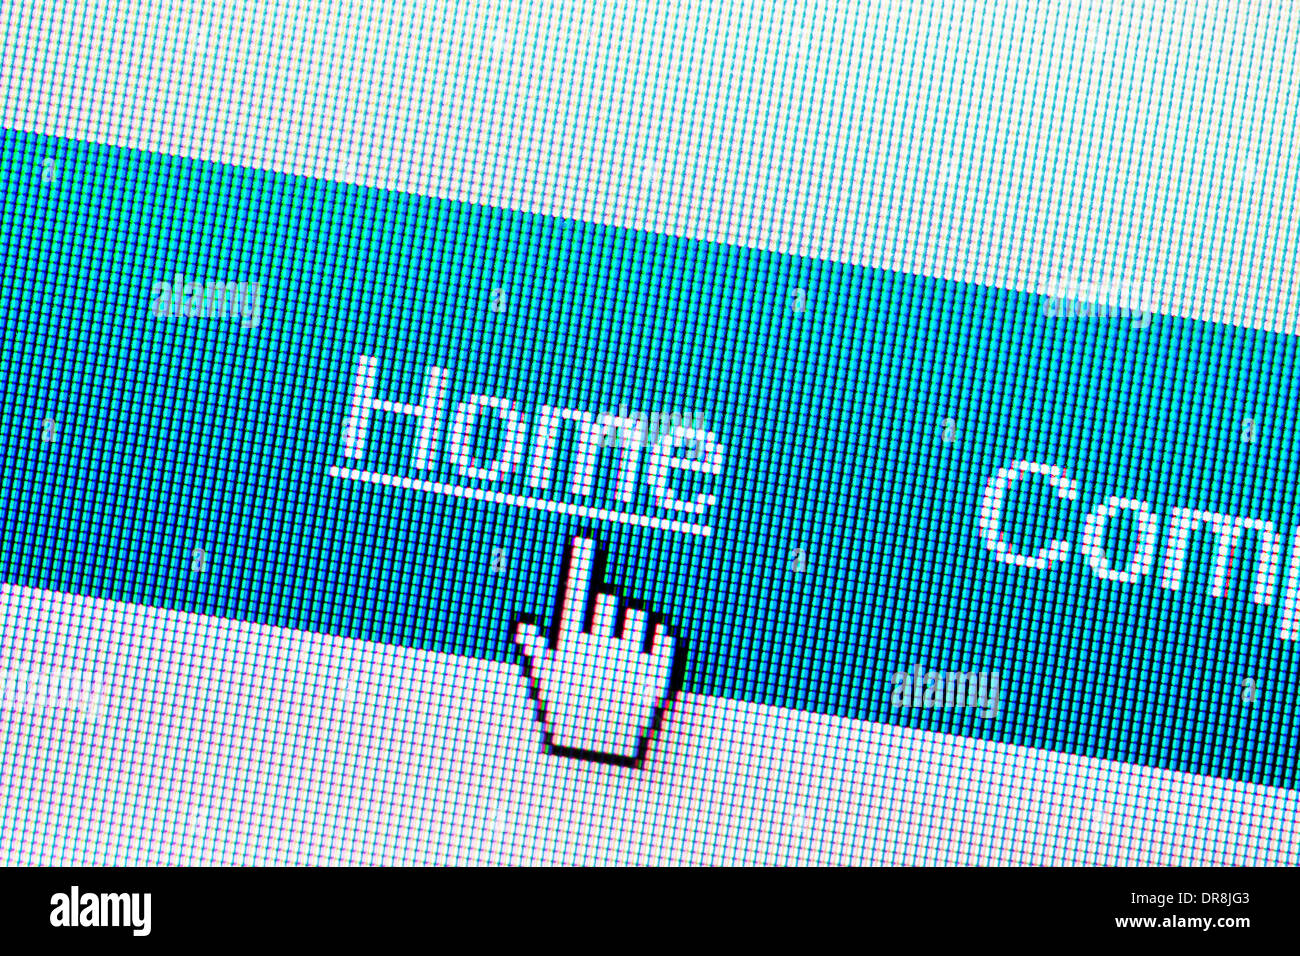 Computer Monitor screen, concept of home page Stock Photo